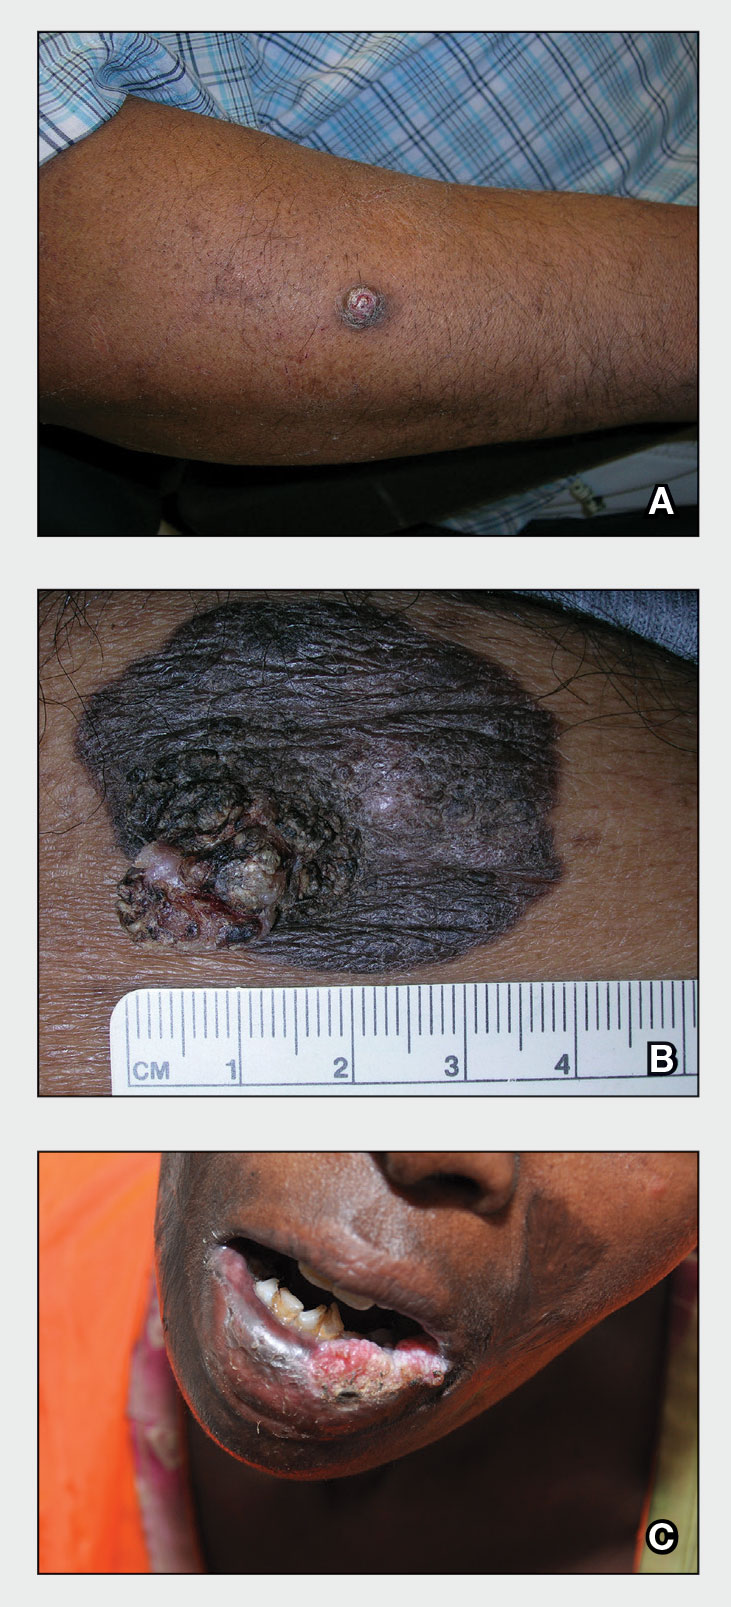 A A 51-year-old Hispanic man with a squamous cell carcinoma (SCC) of the keratoacanthoma type on the arm.